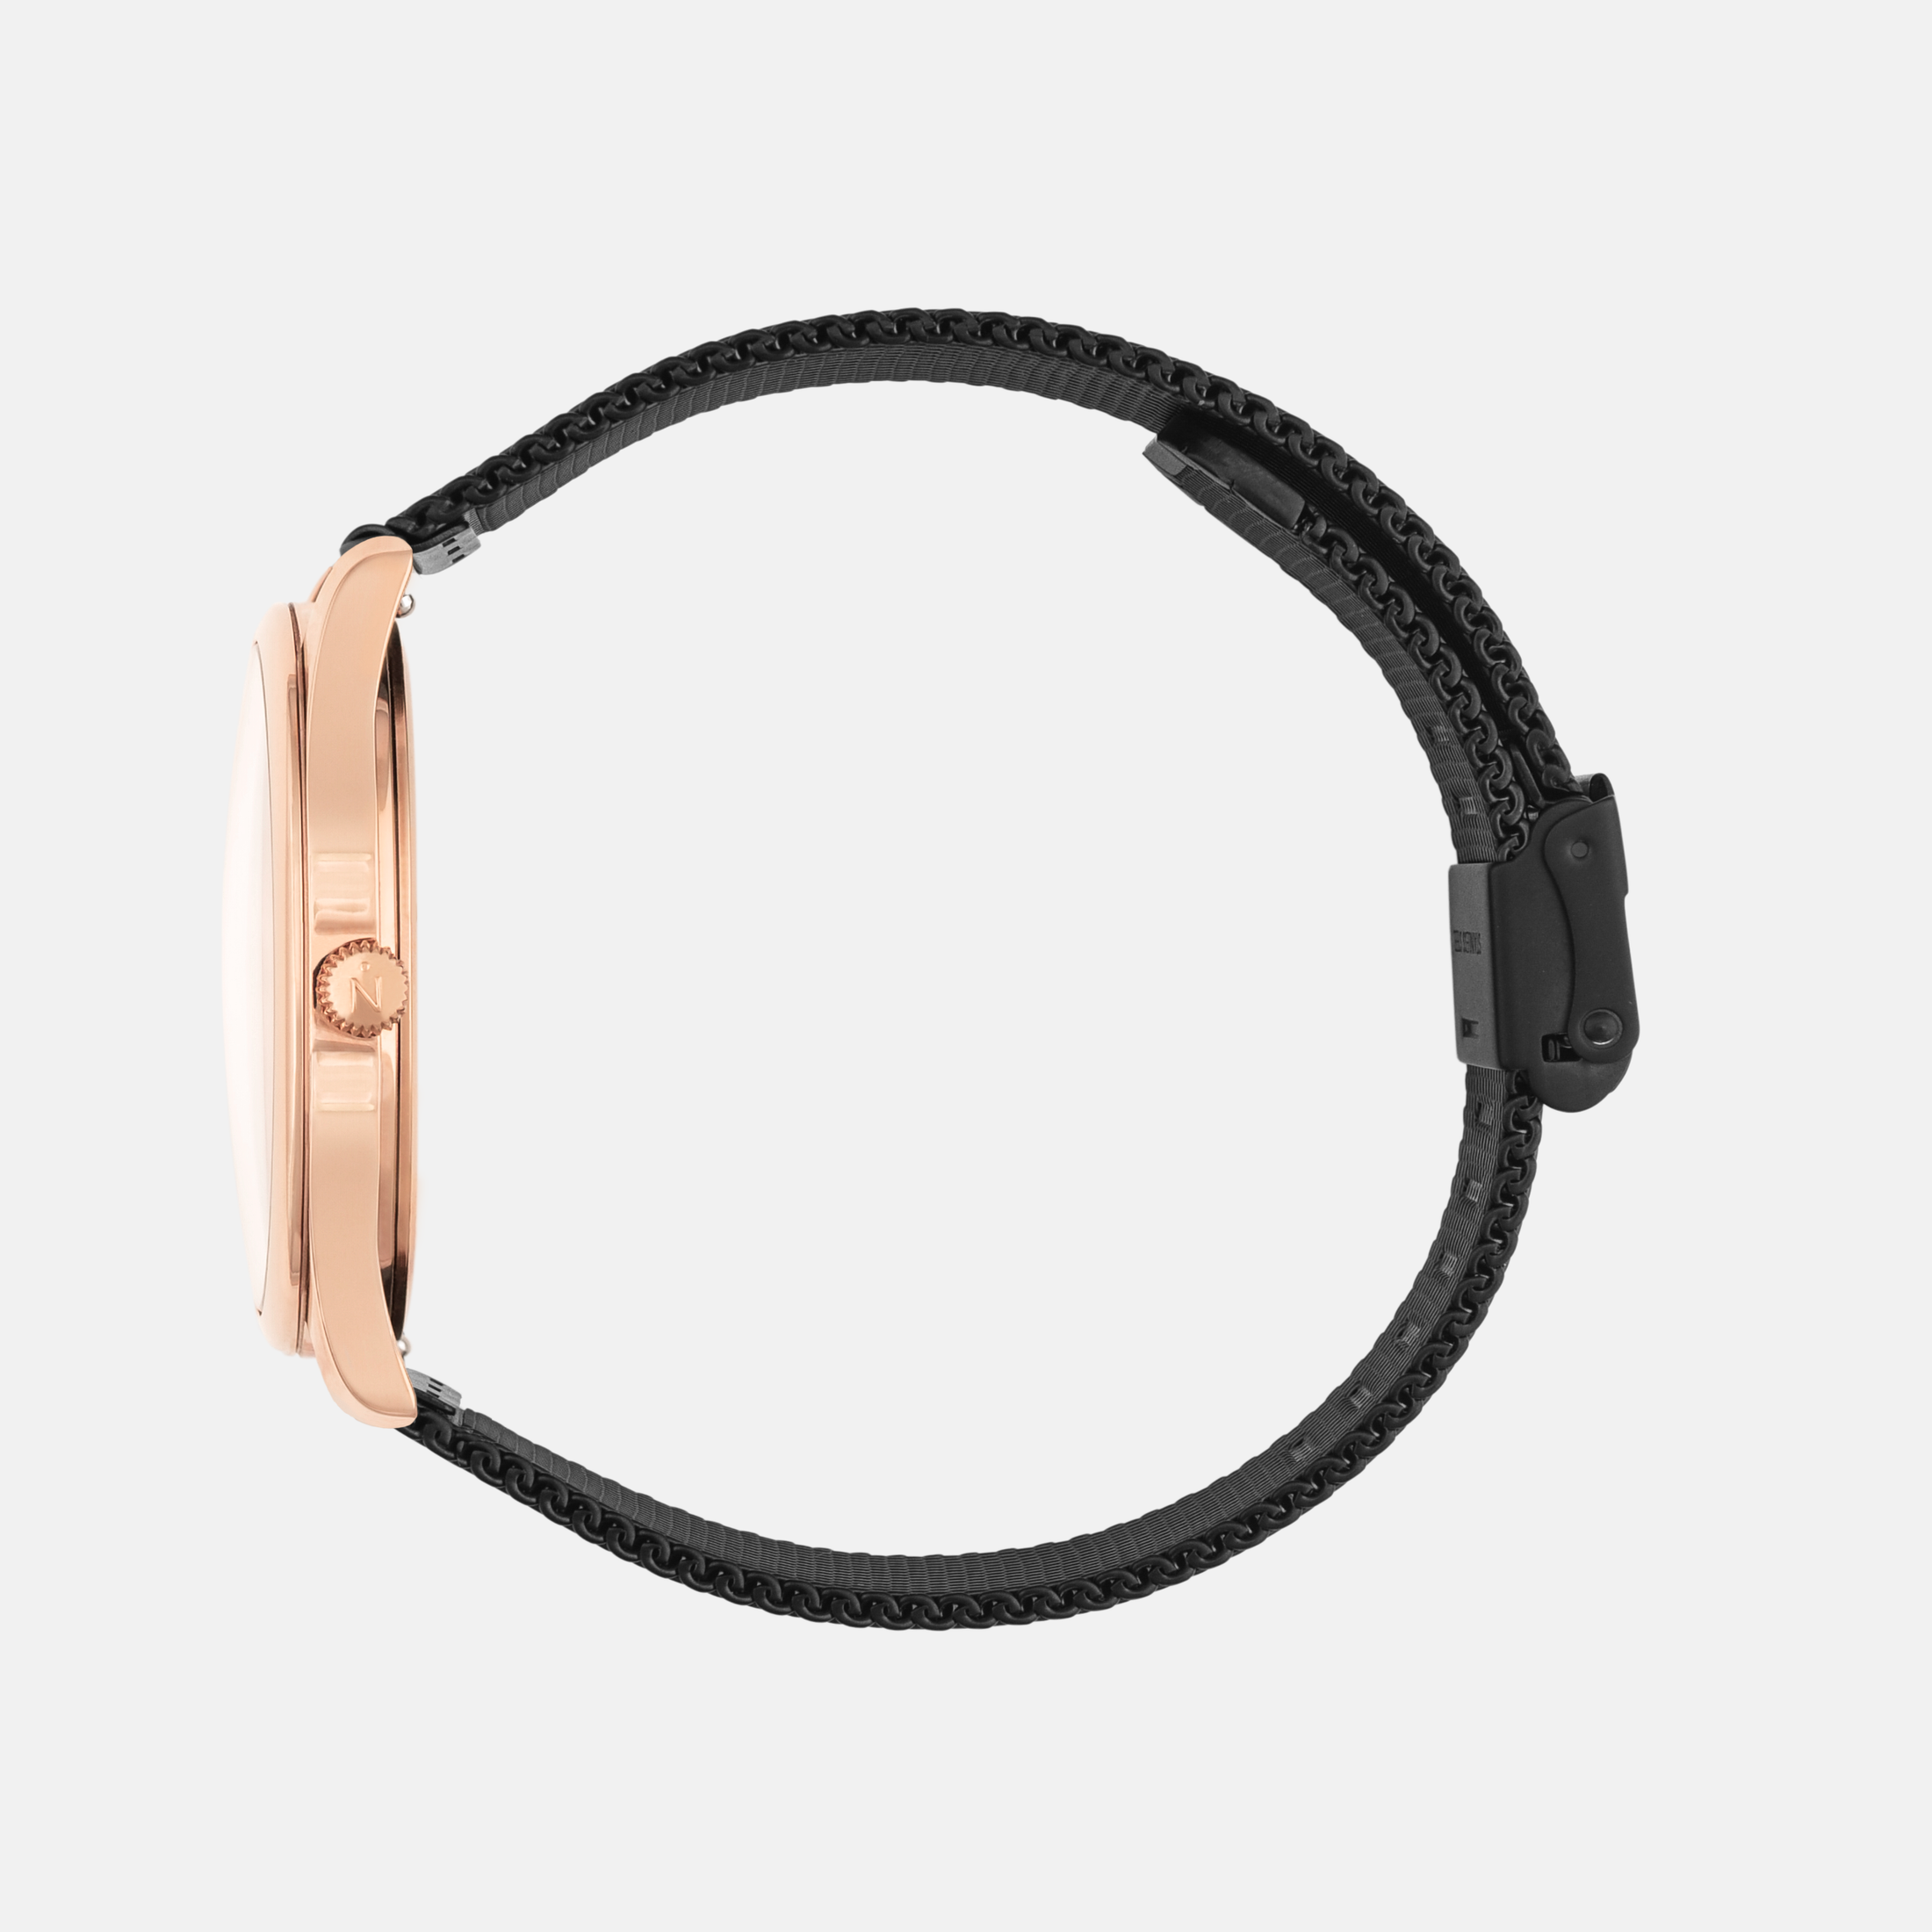 Lune 8 - Rose Gold - Sand Leather